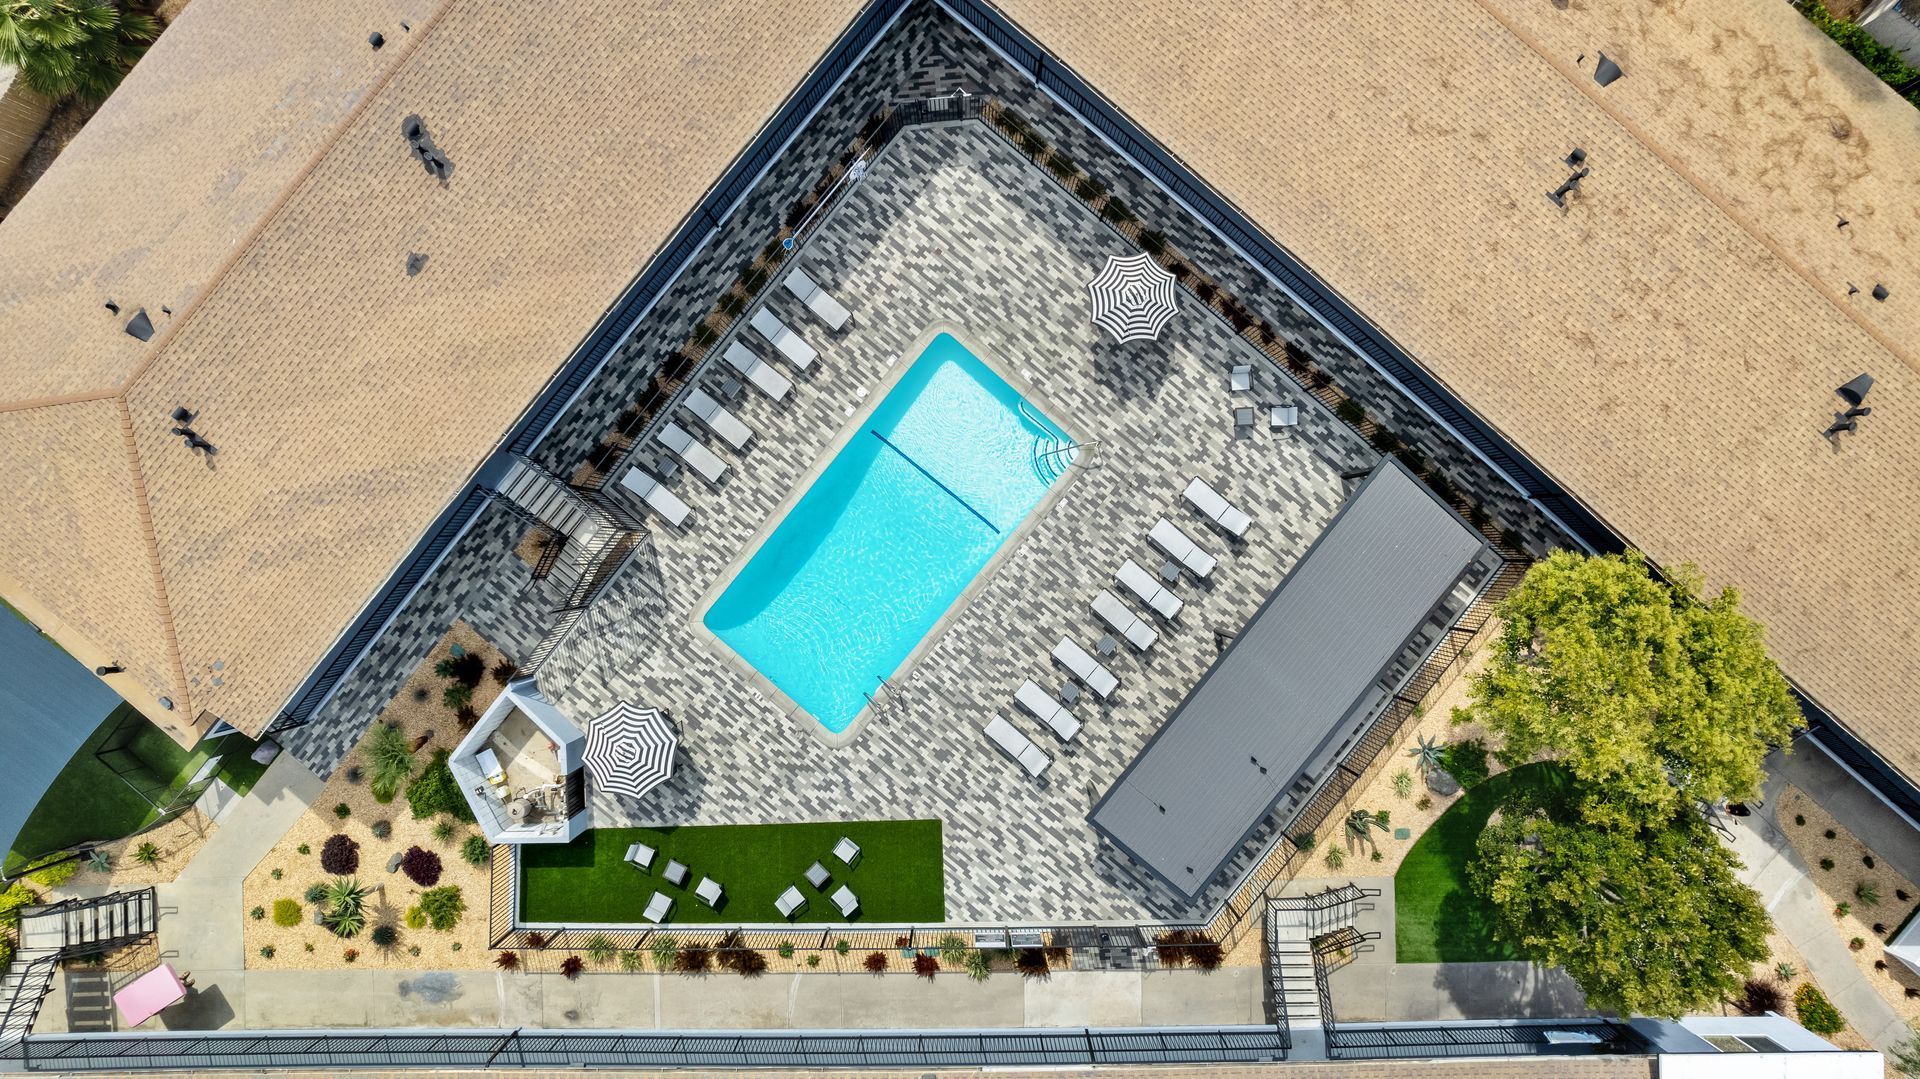 An aerial view of a swimming pool in a residential area